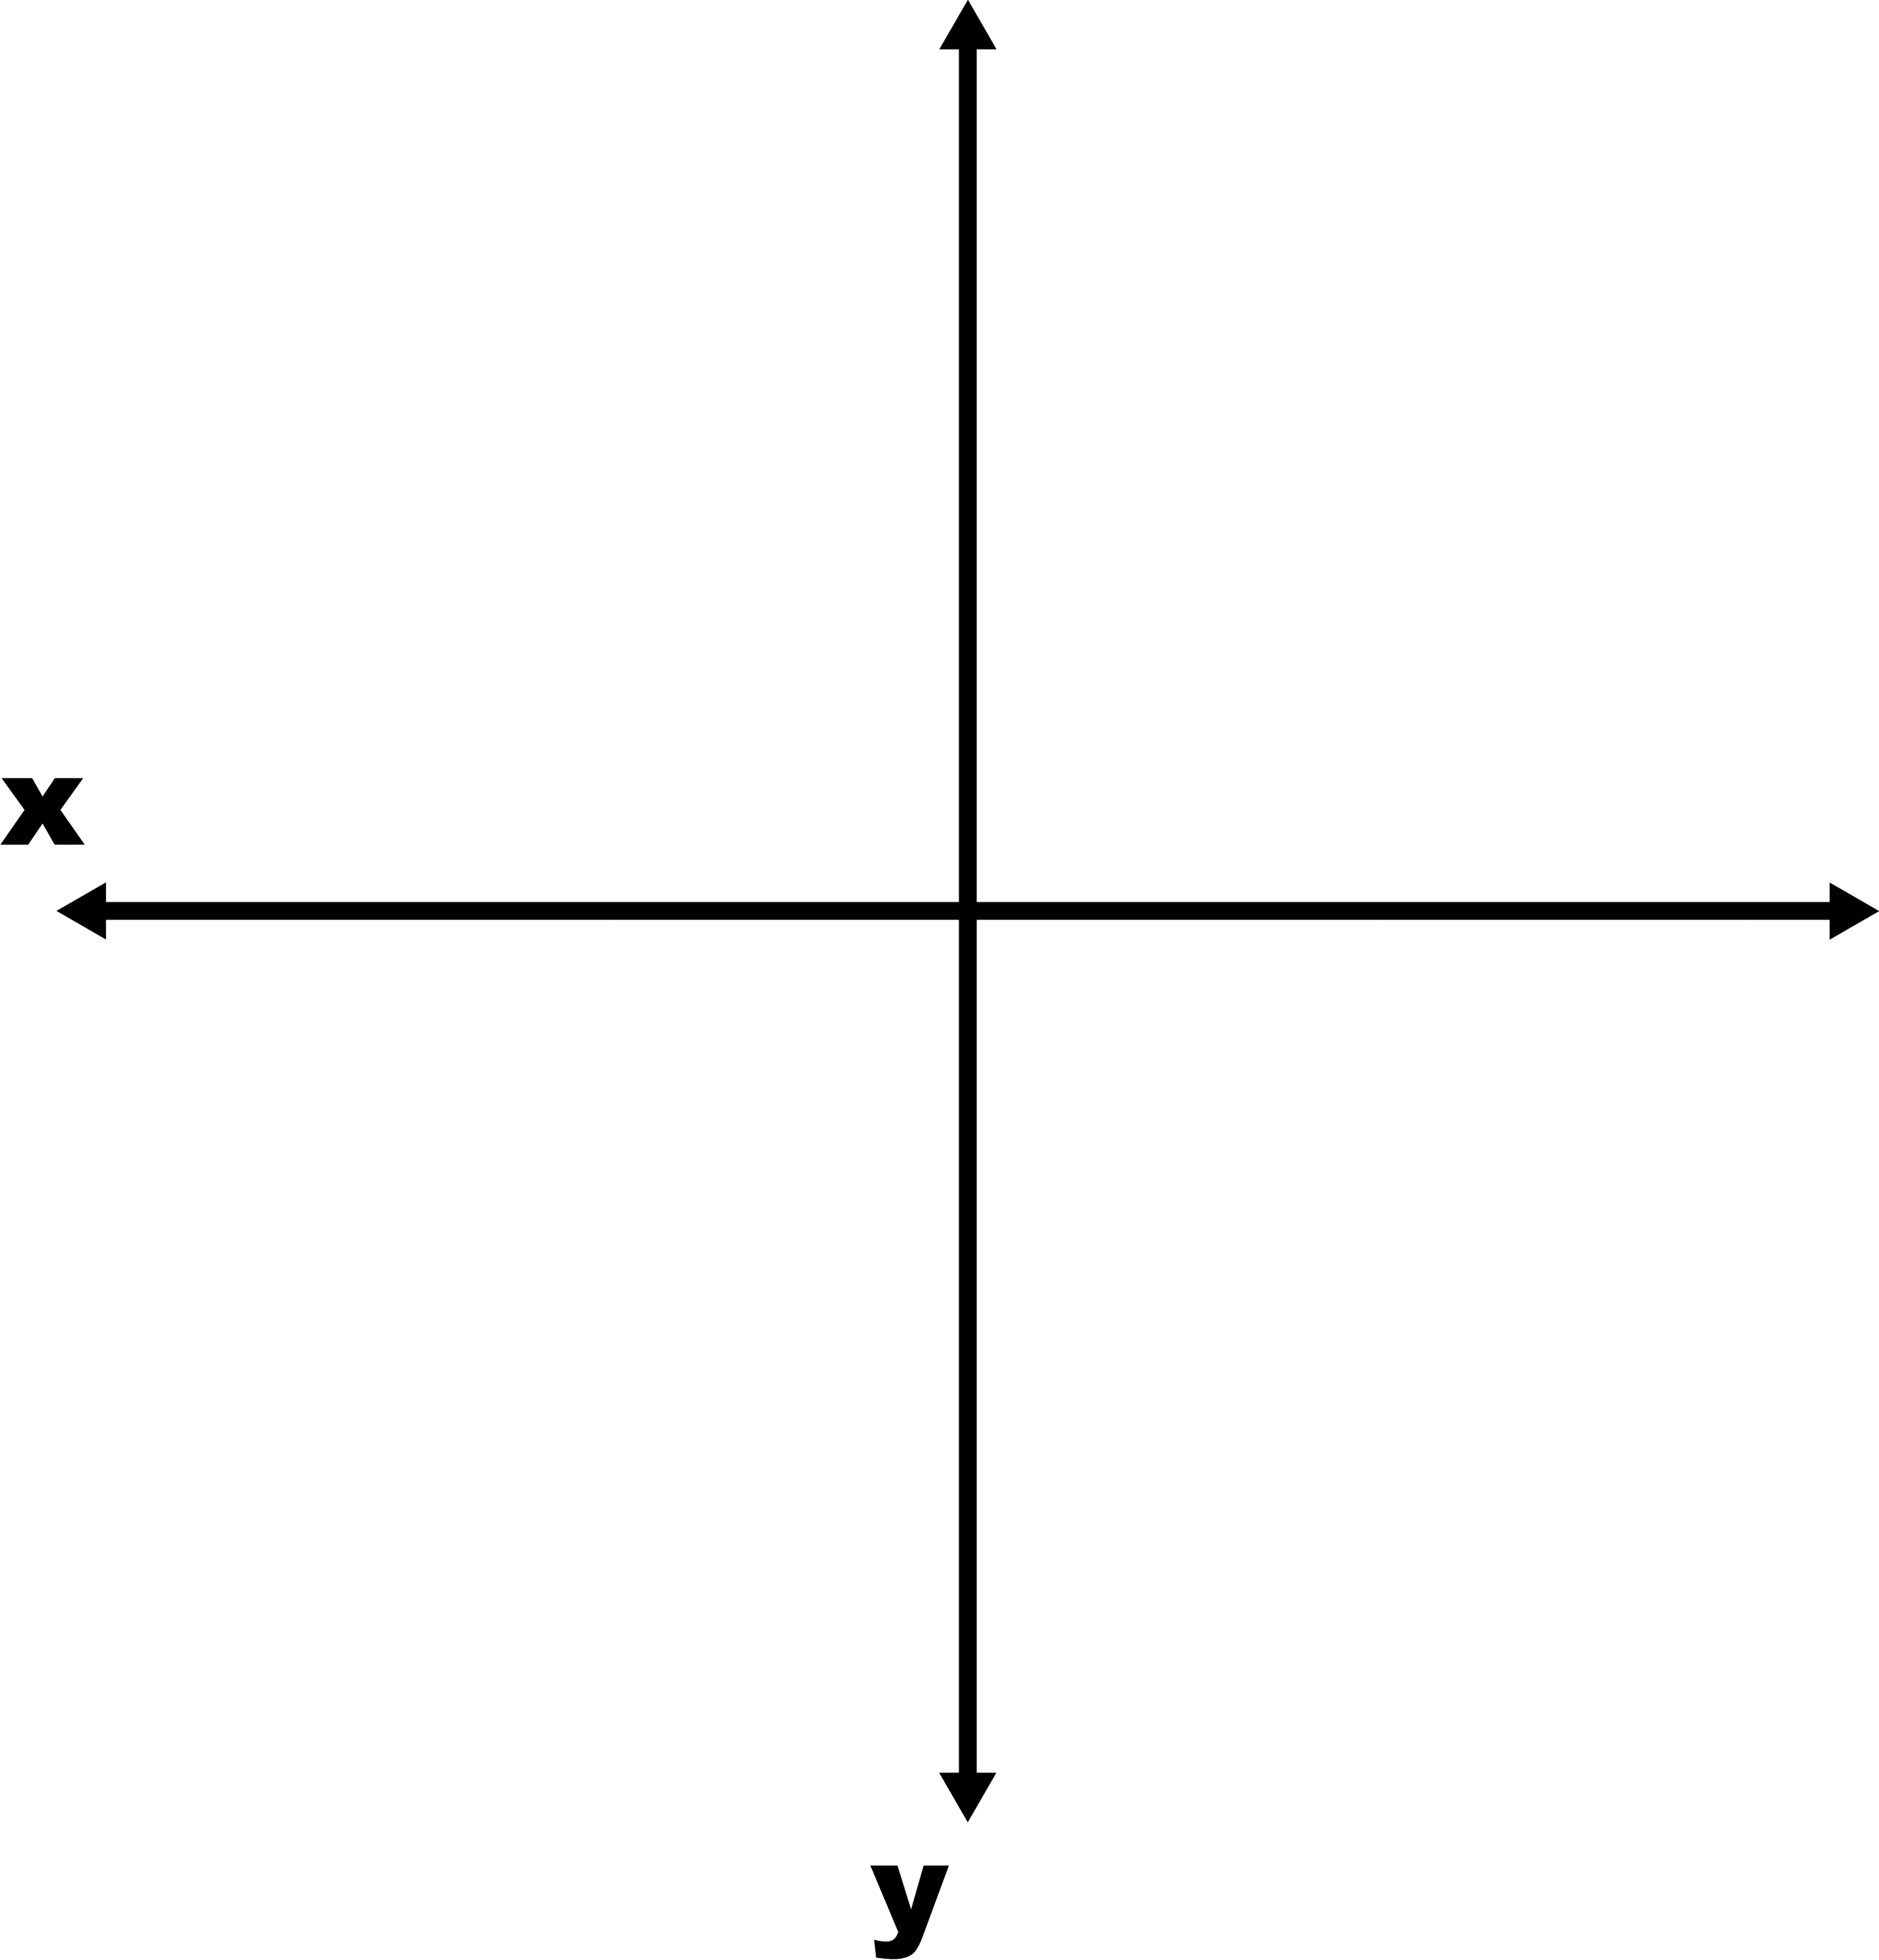 Coordinate Grid With Axes Labeled